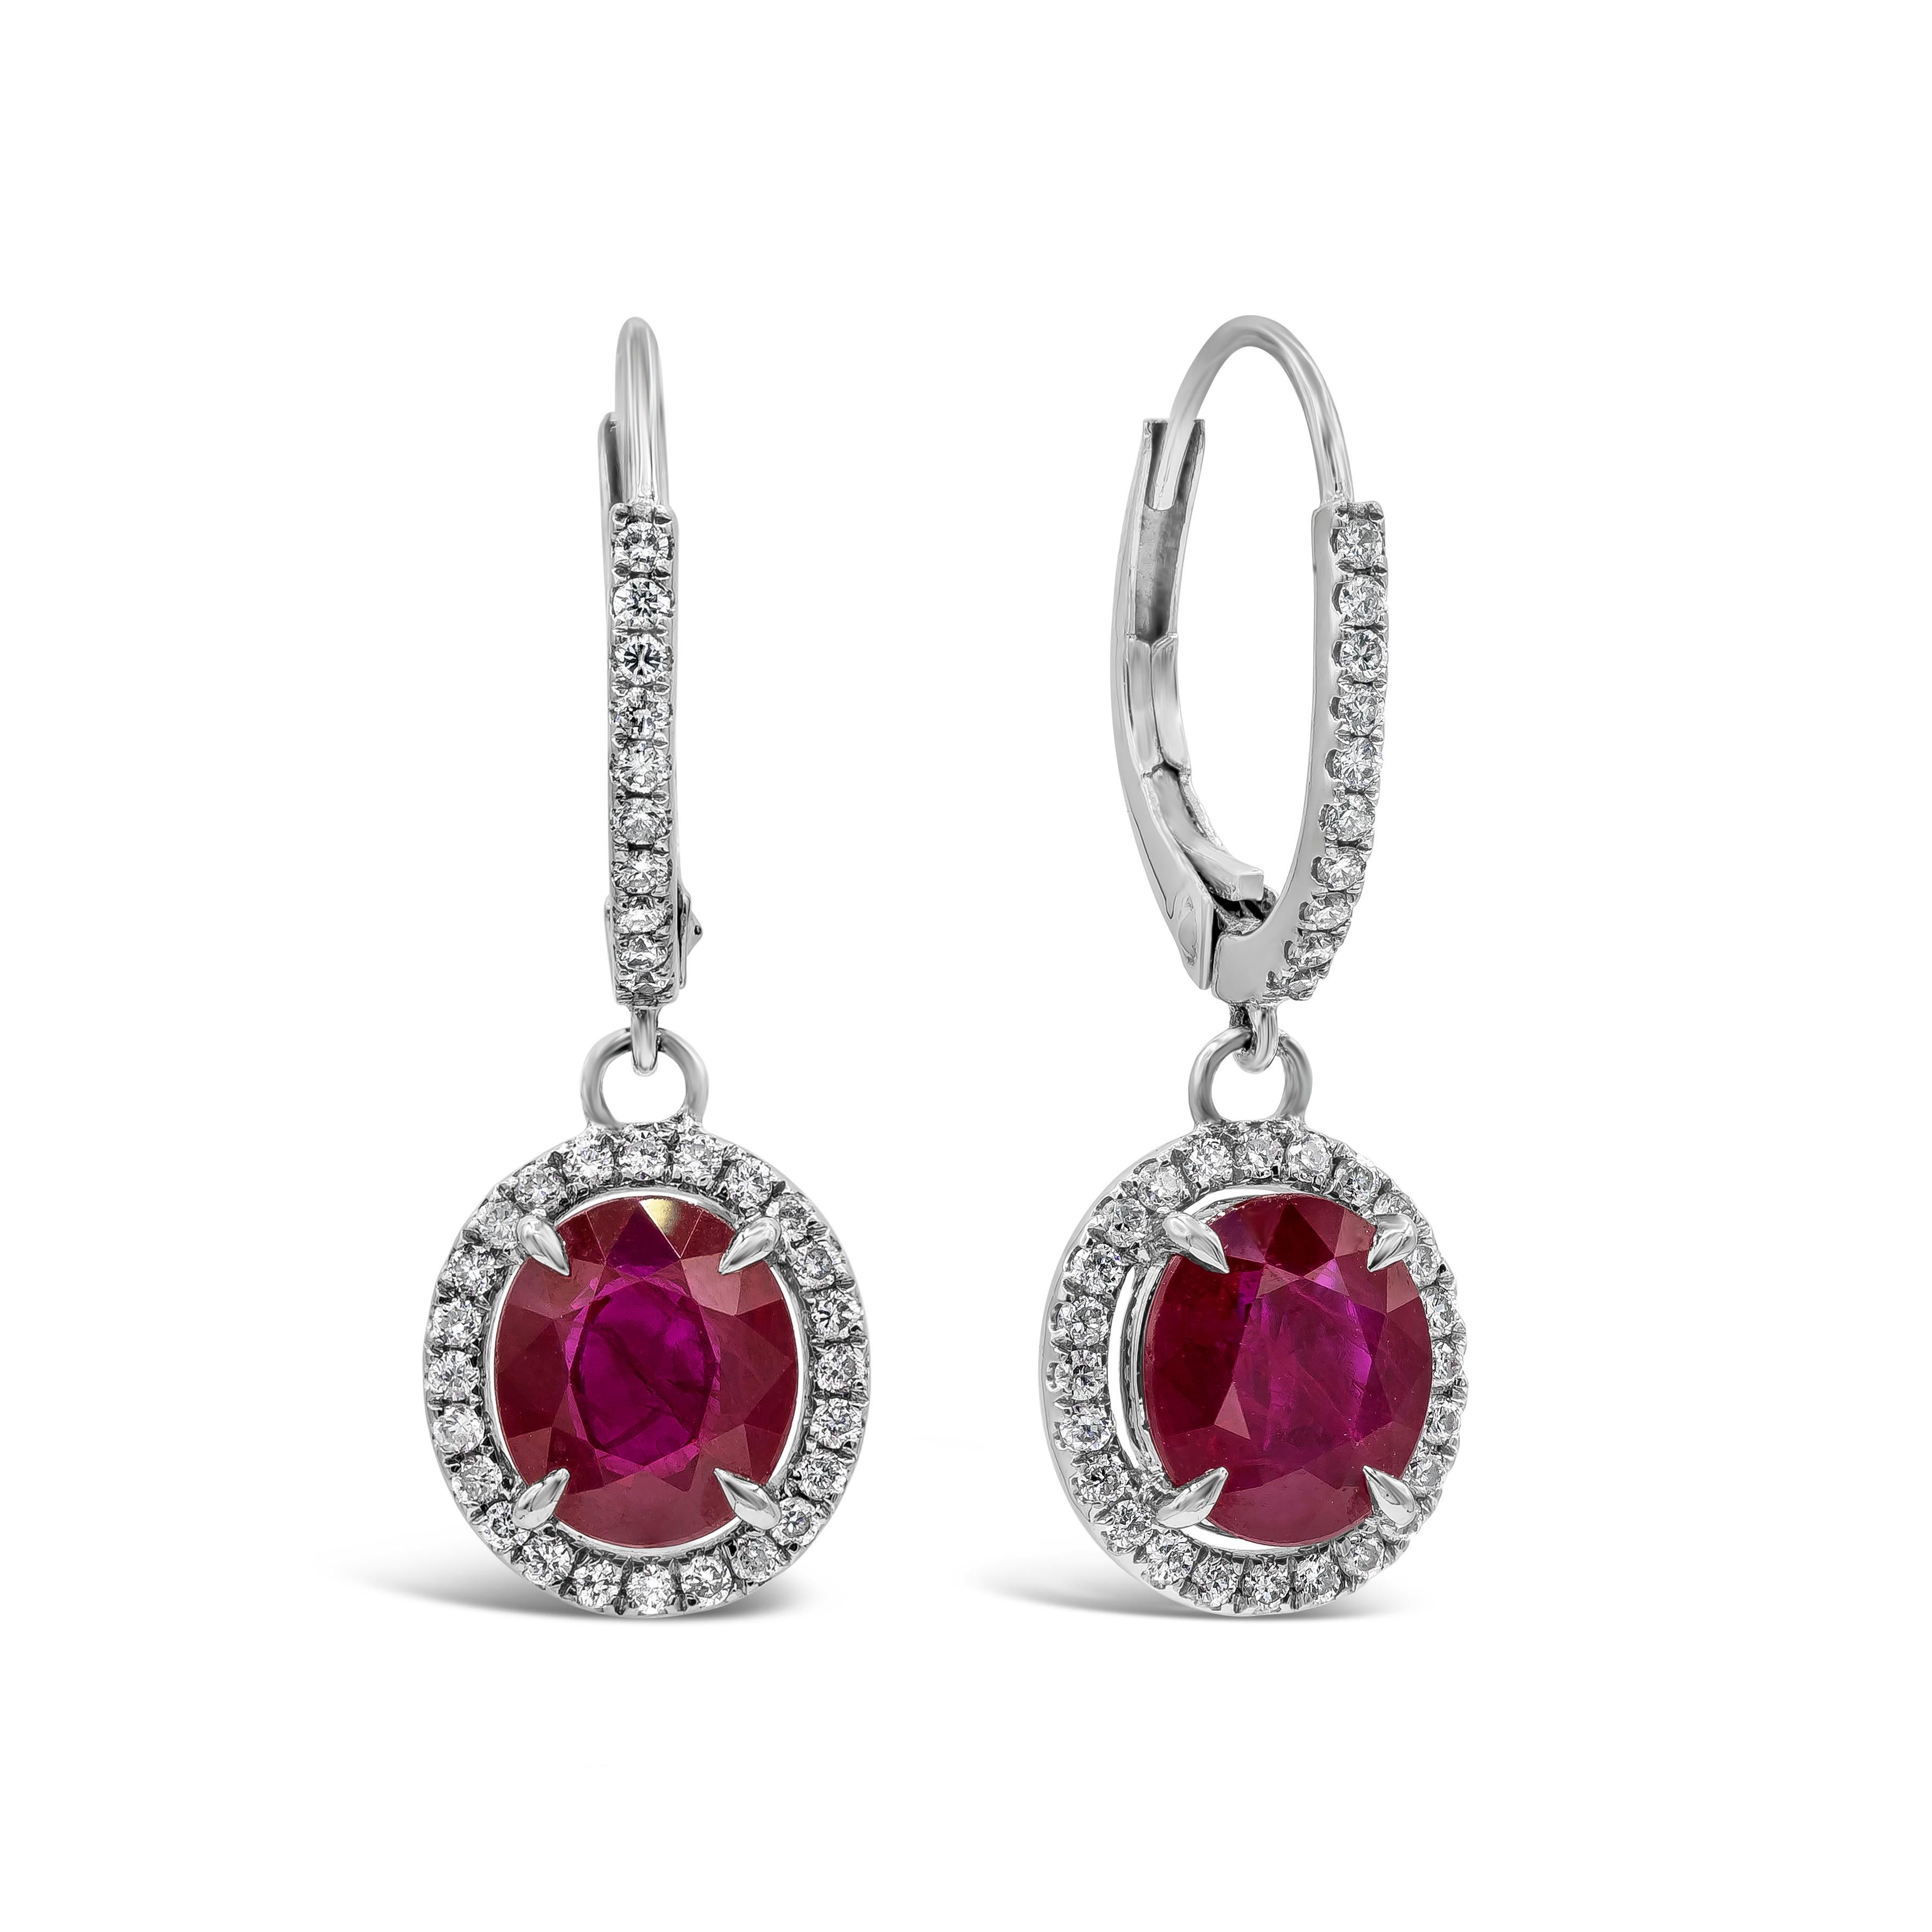 Contemporary Roman Malakov 2.83 Carats Total Oval Cut Ruby and Diamond Halo Dangle Earrings For Sale